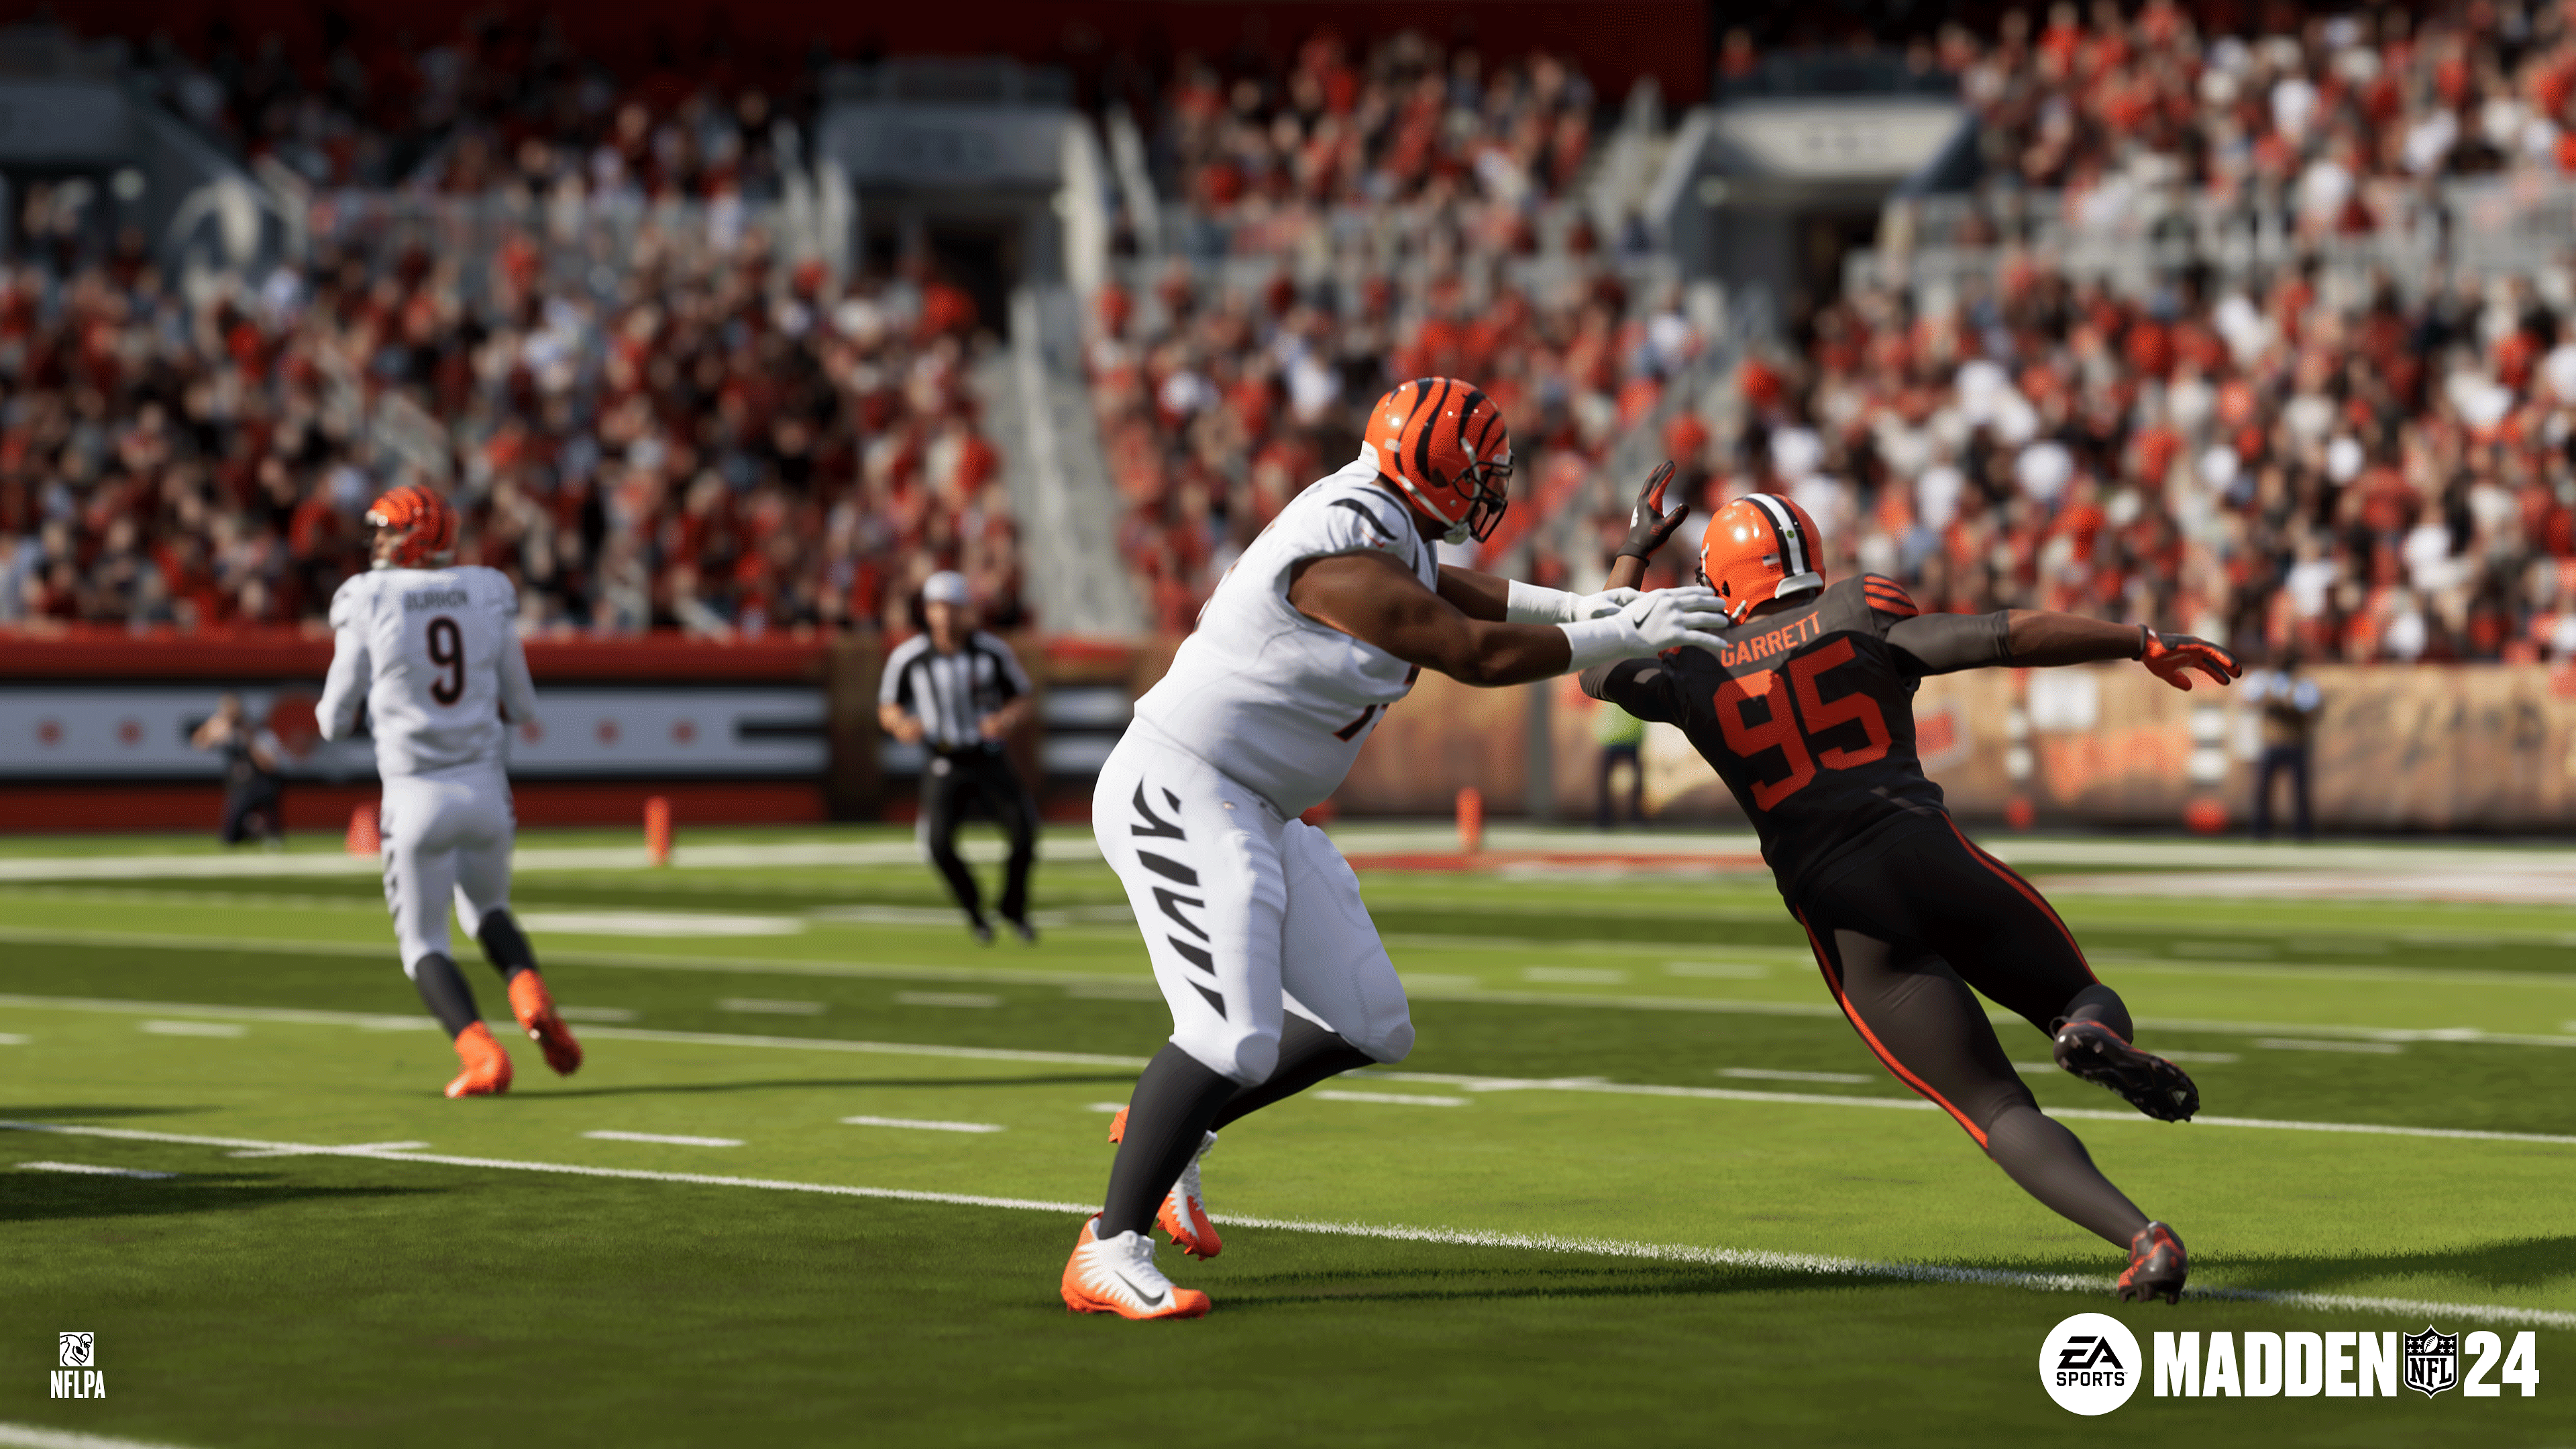 Madden NFL 22 release date, early access, and pre-order guide